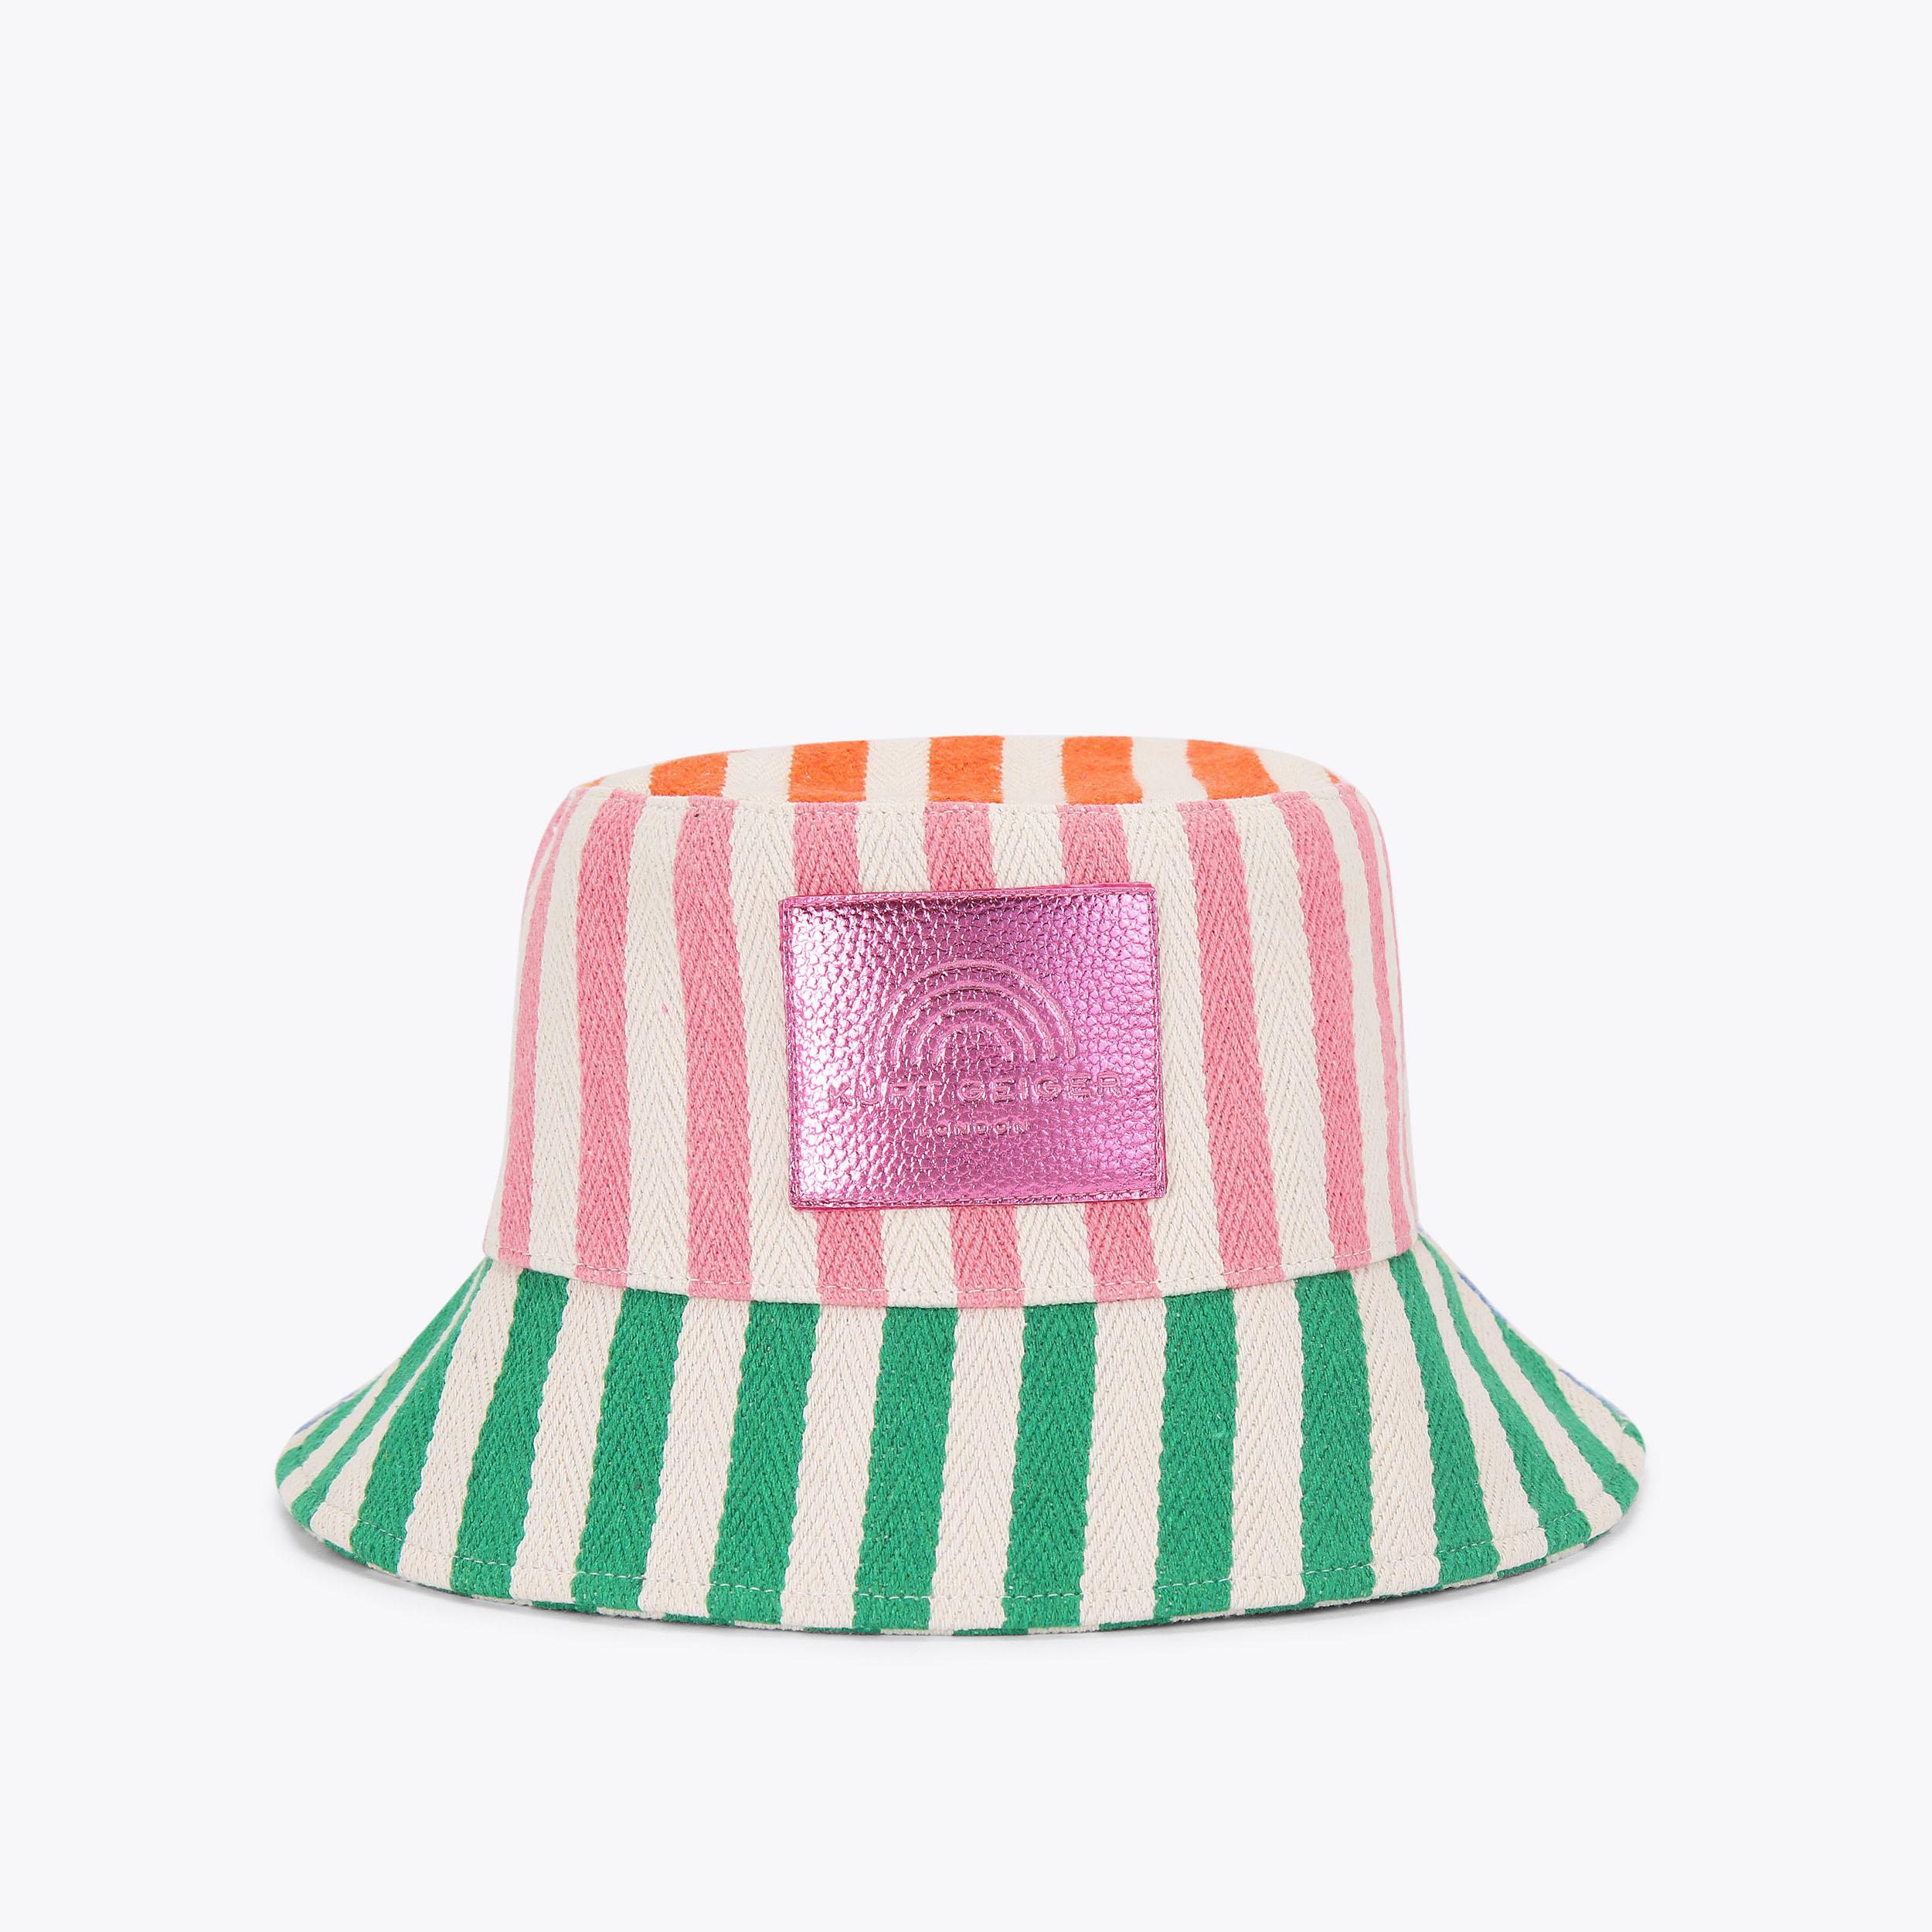 Jagermeister Reversible Cotton Bucket Hat Cool, Stylish, And Versatile For  Outdoor Sports And Daily Wear From Belleye_store, $4.32